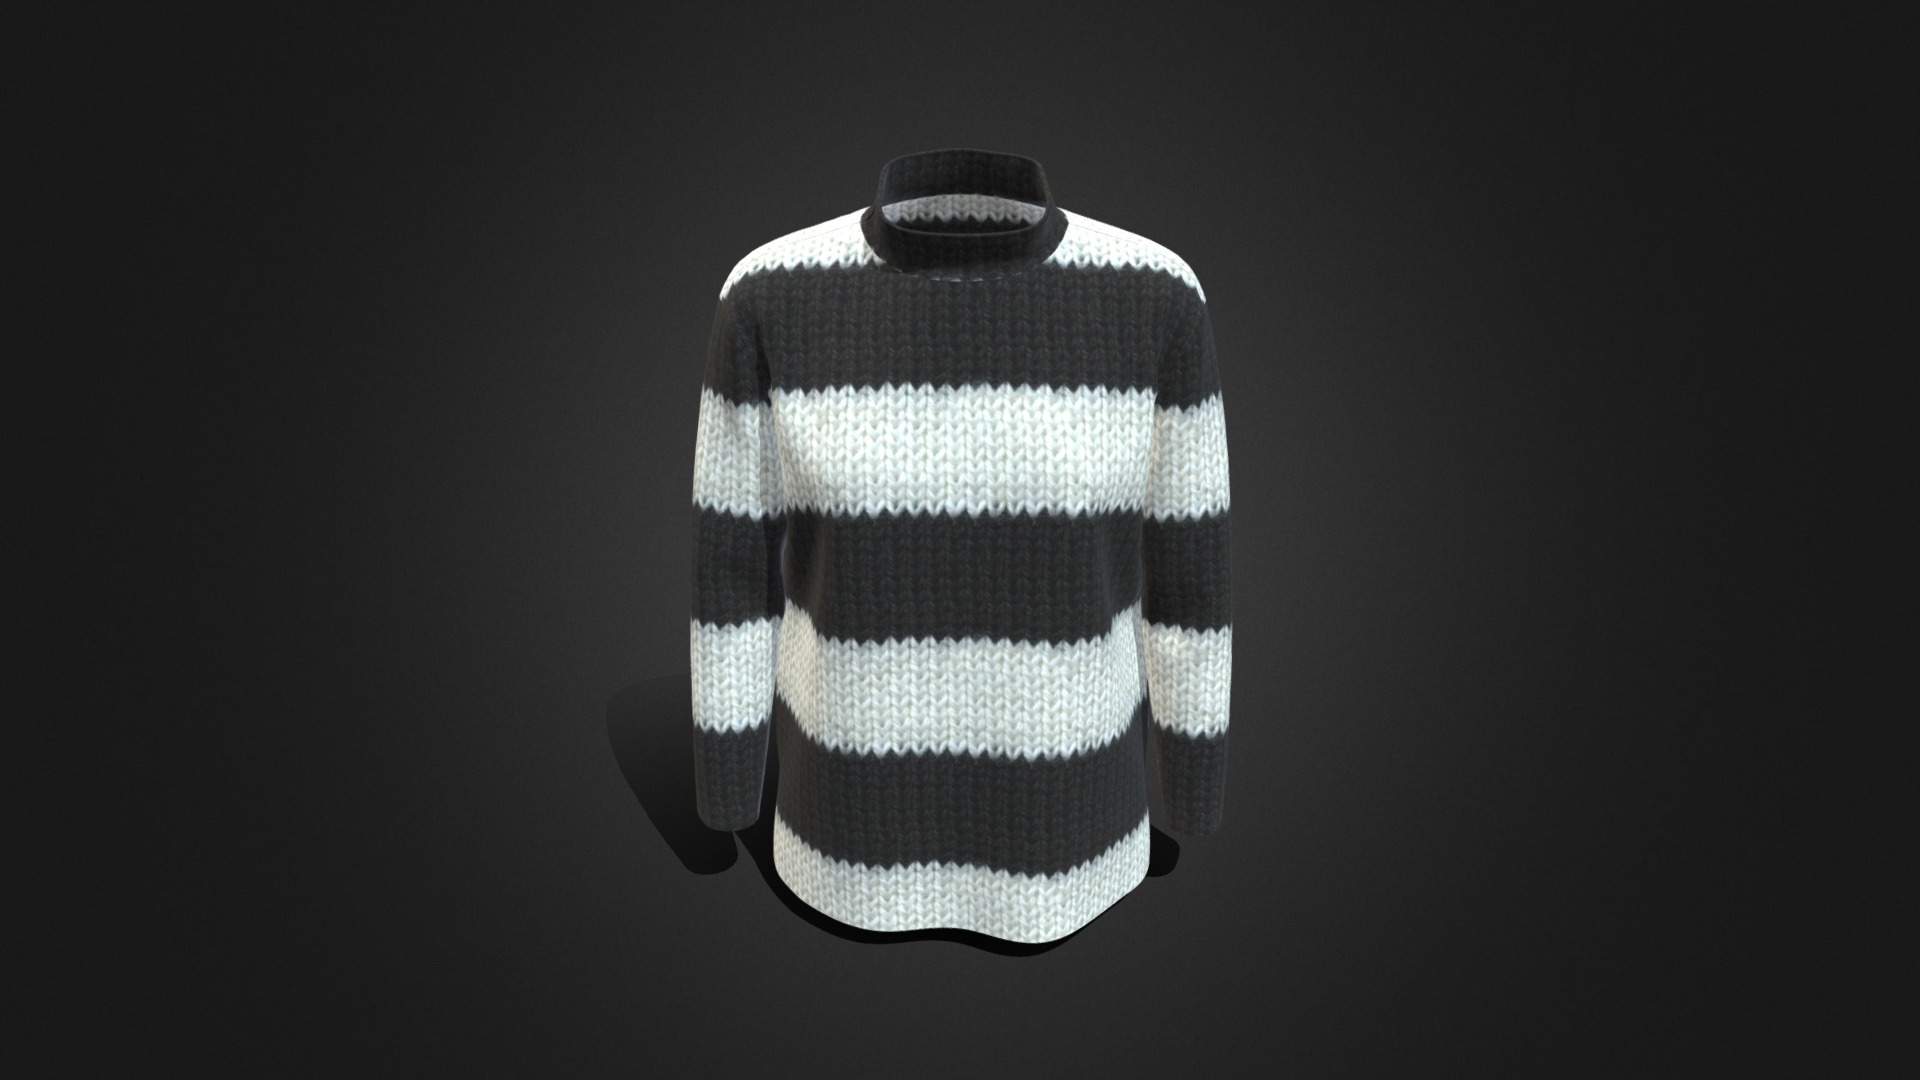 3D model a high-neck T-shirt - This is a 3D model of the a high-neck T-shirt. The 3D model is about a black and white striped shirt.